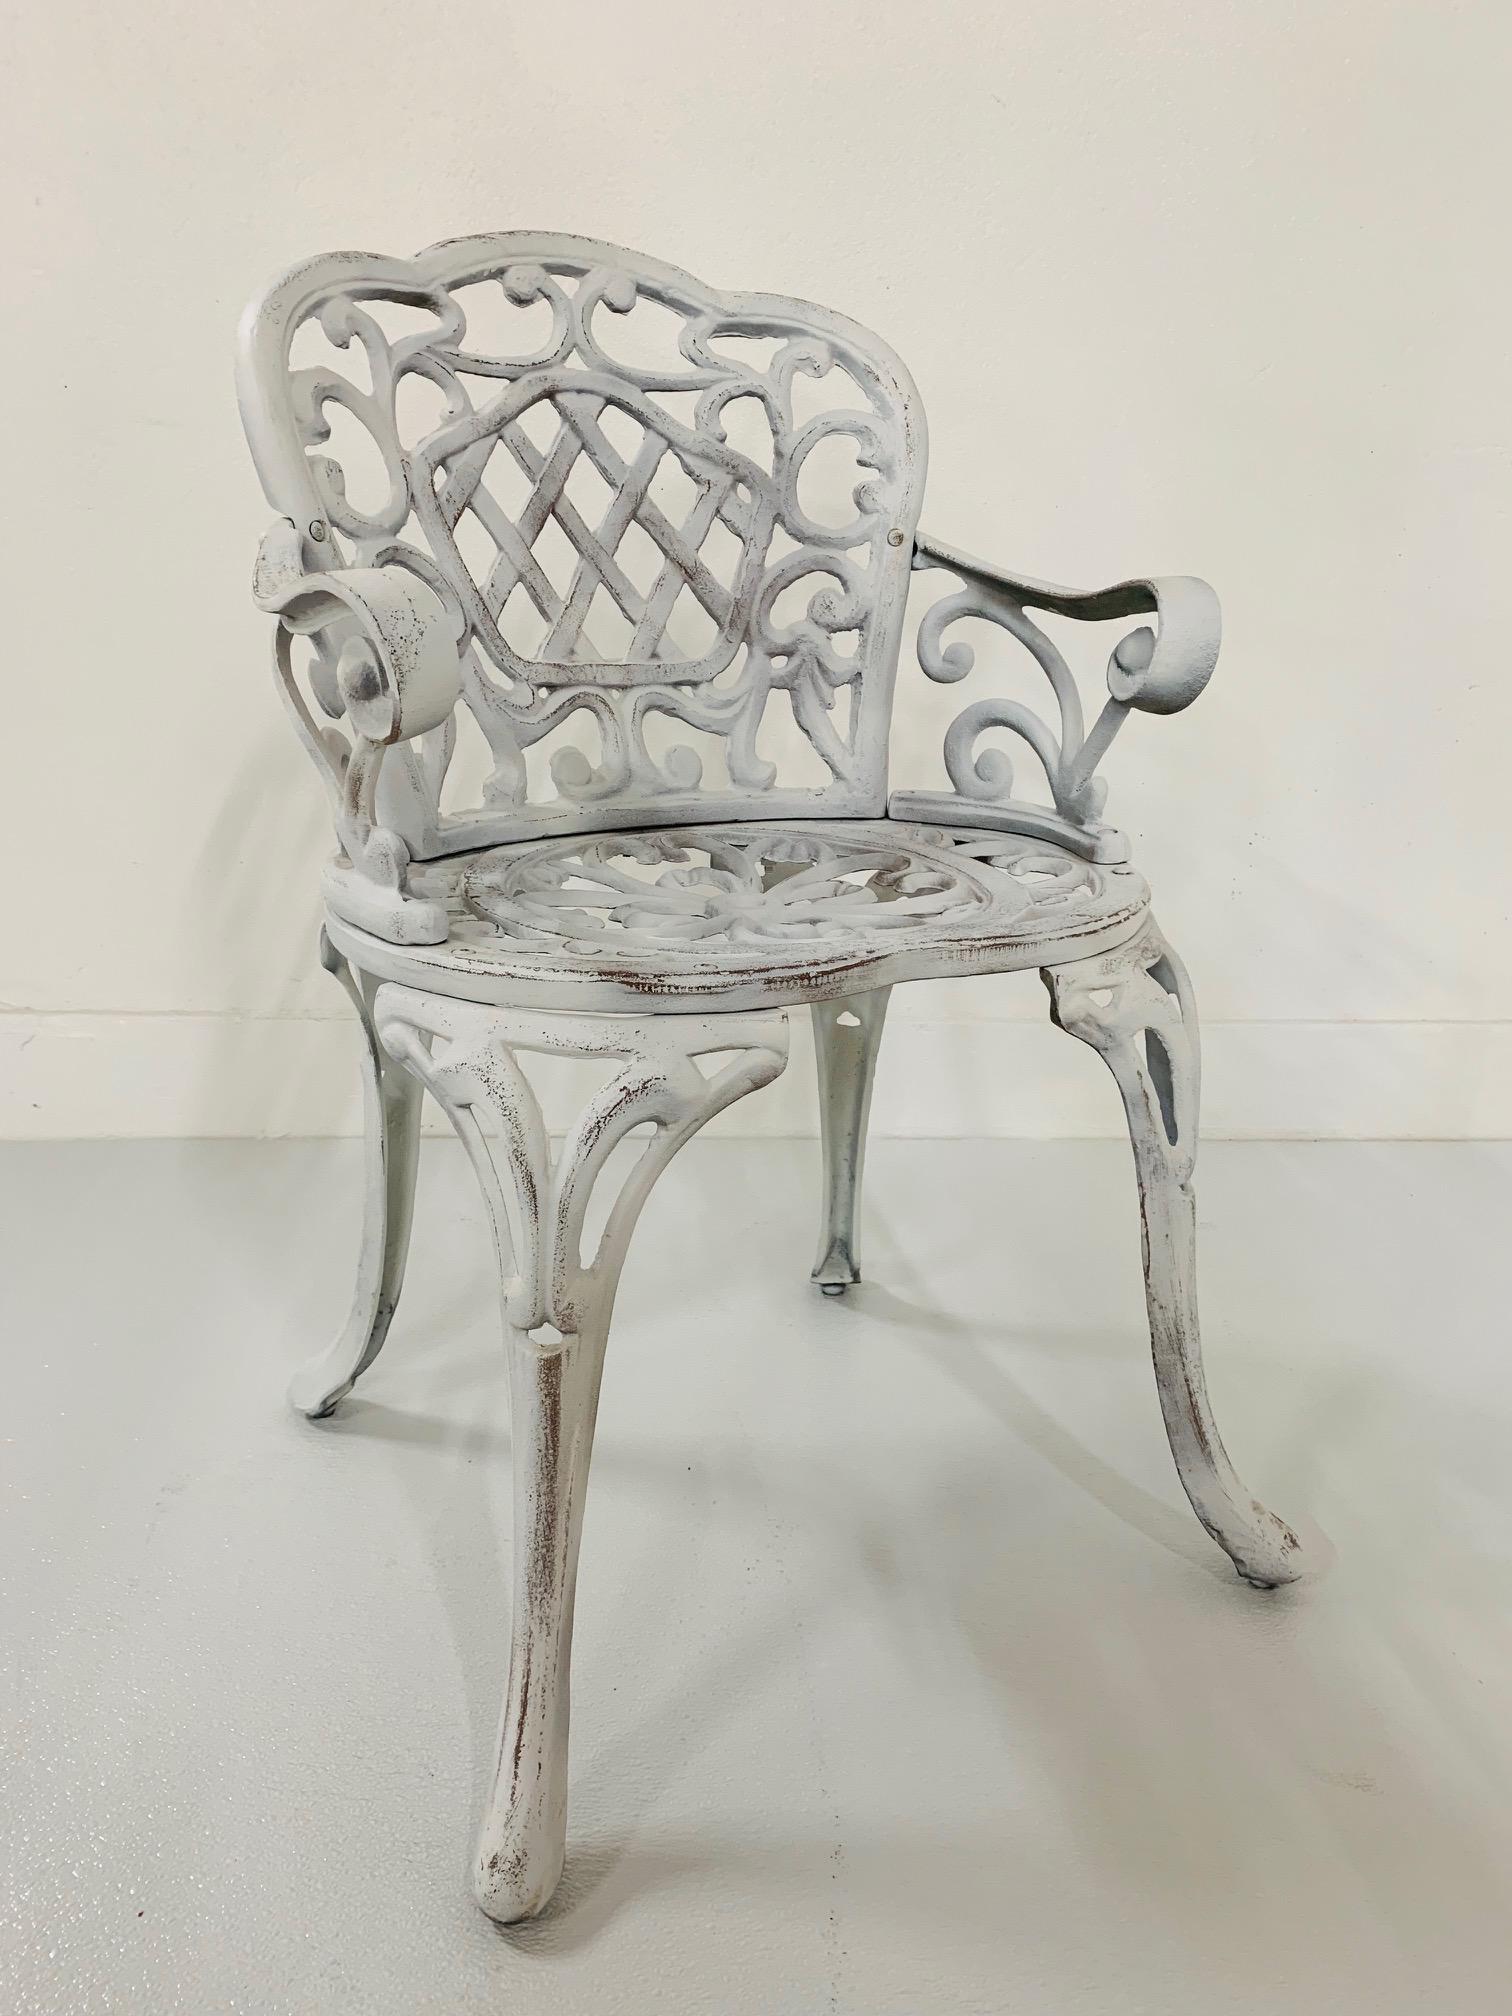 Pair of early cast iron garden armchairs. Painted white finish with a decorative pattern.